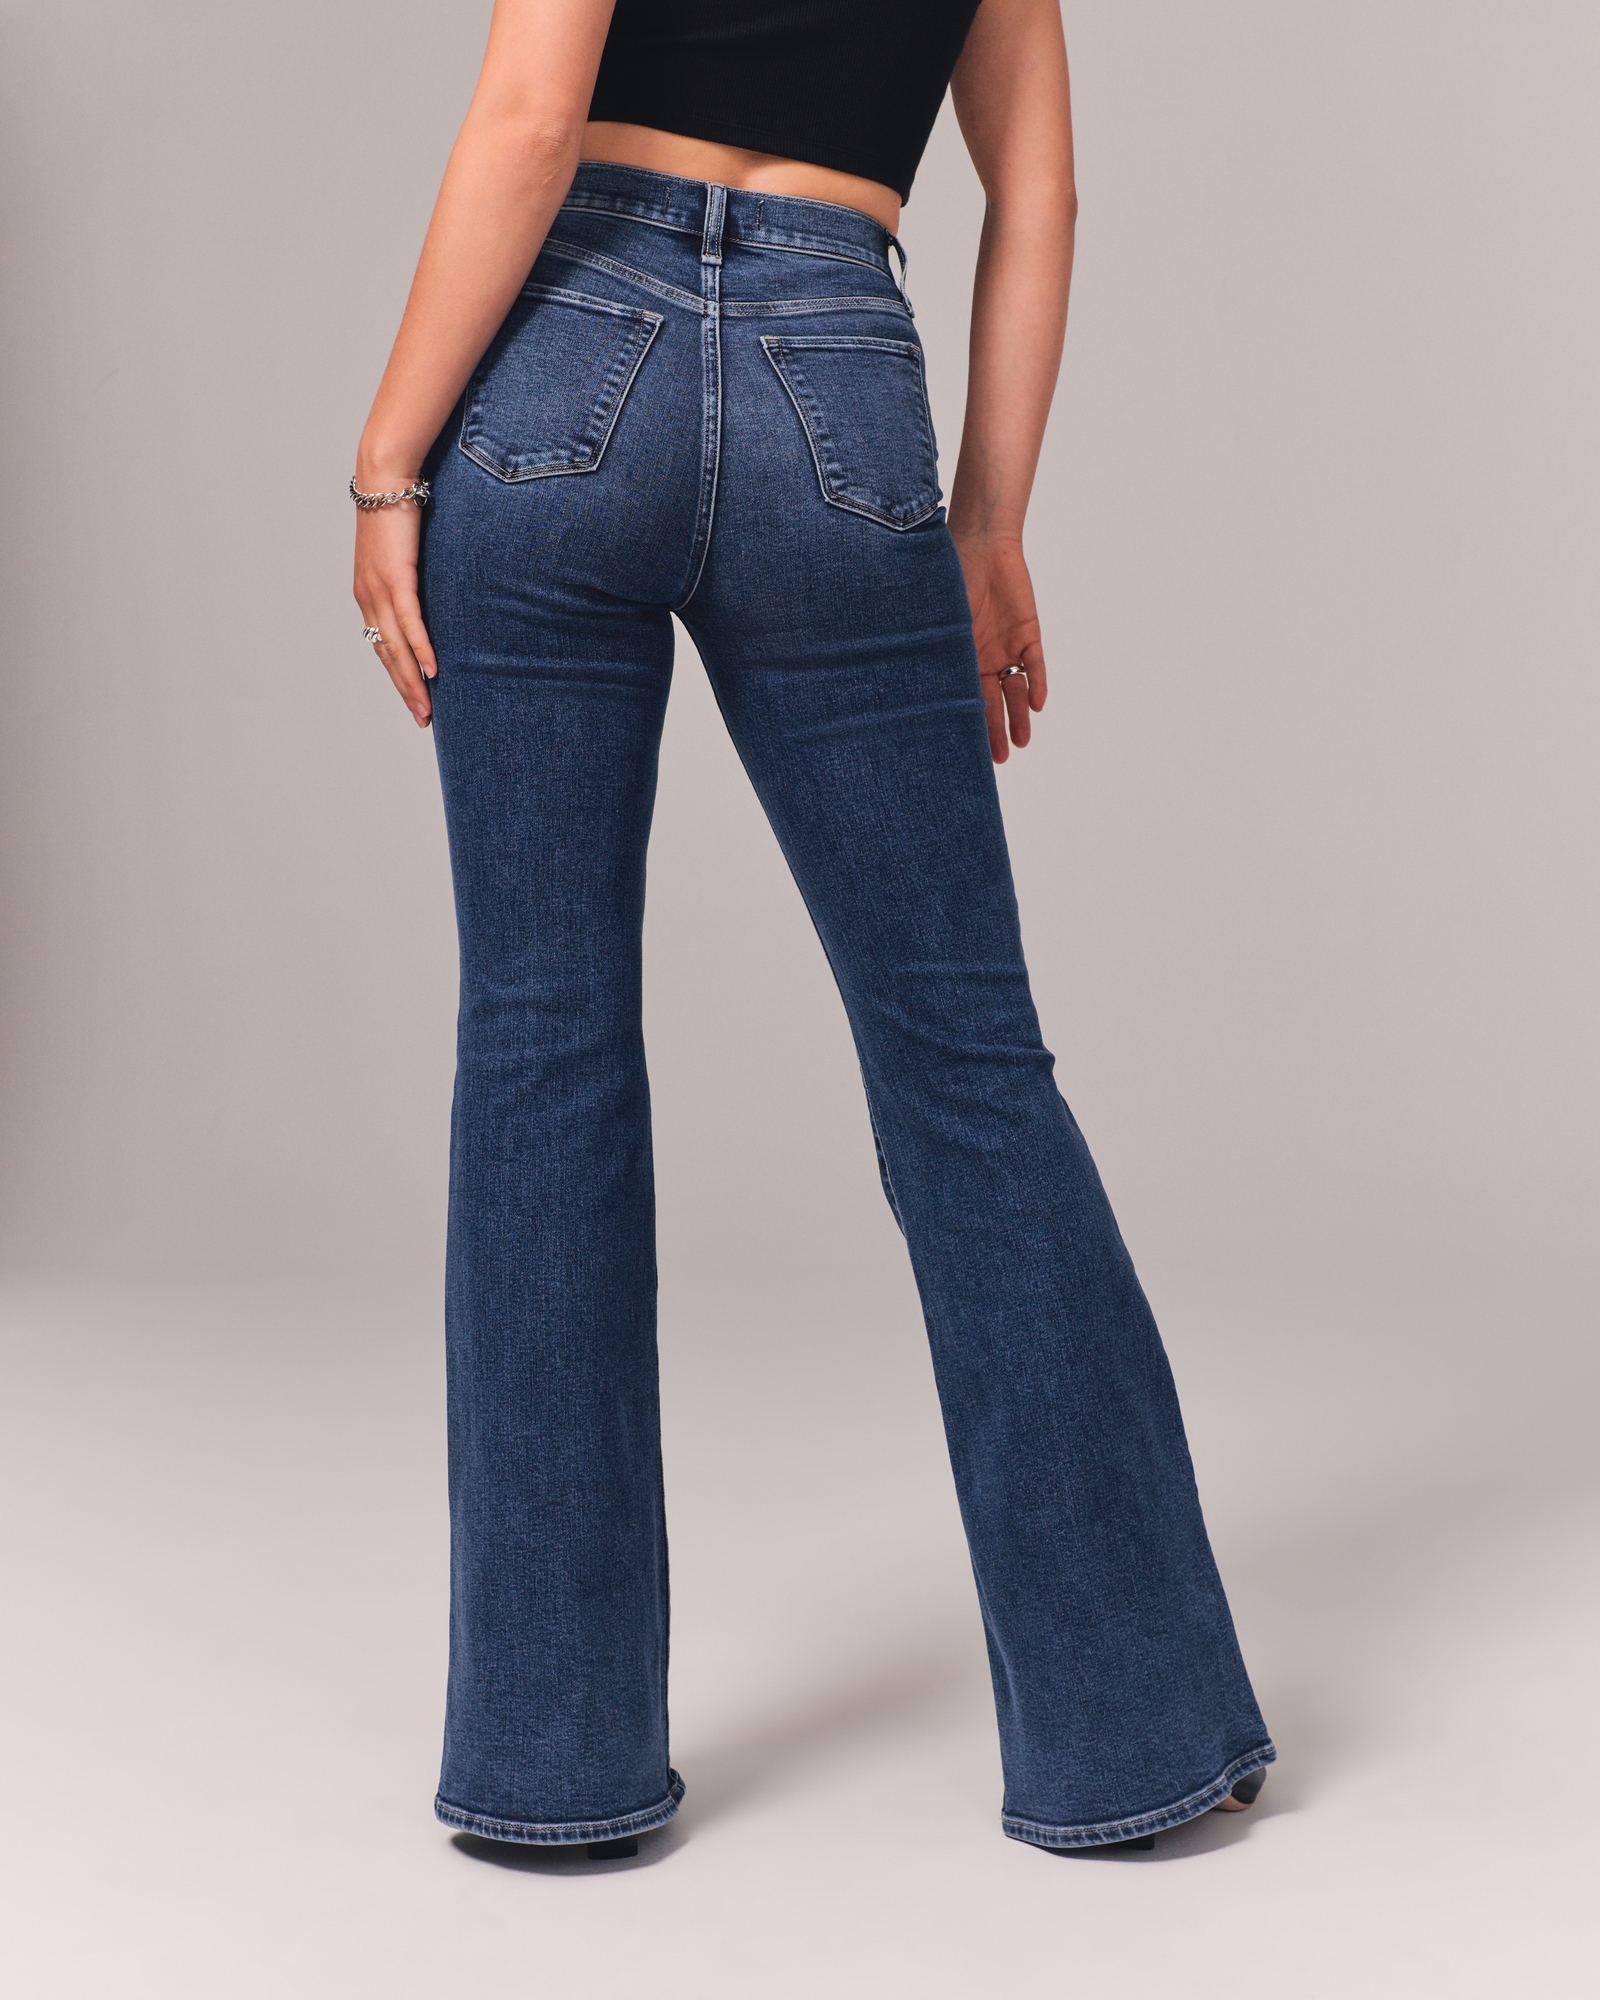 Abercrombie & Fitch The Kick Flare Ultra High Rise Jeans 30 10S Petite